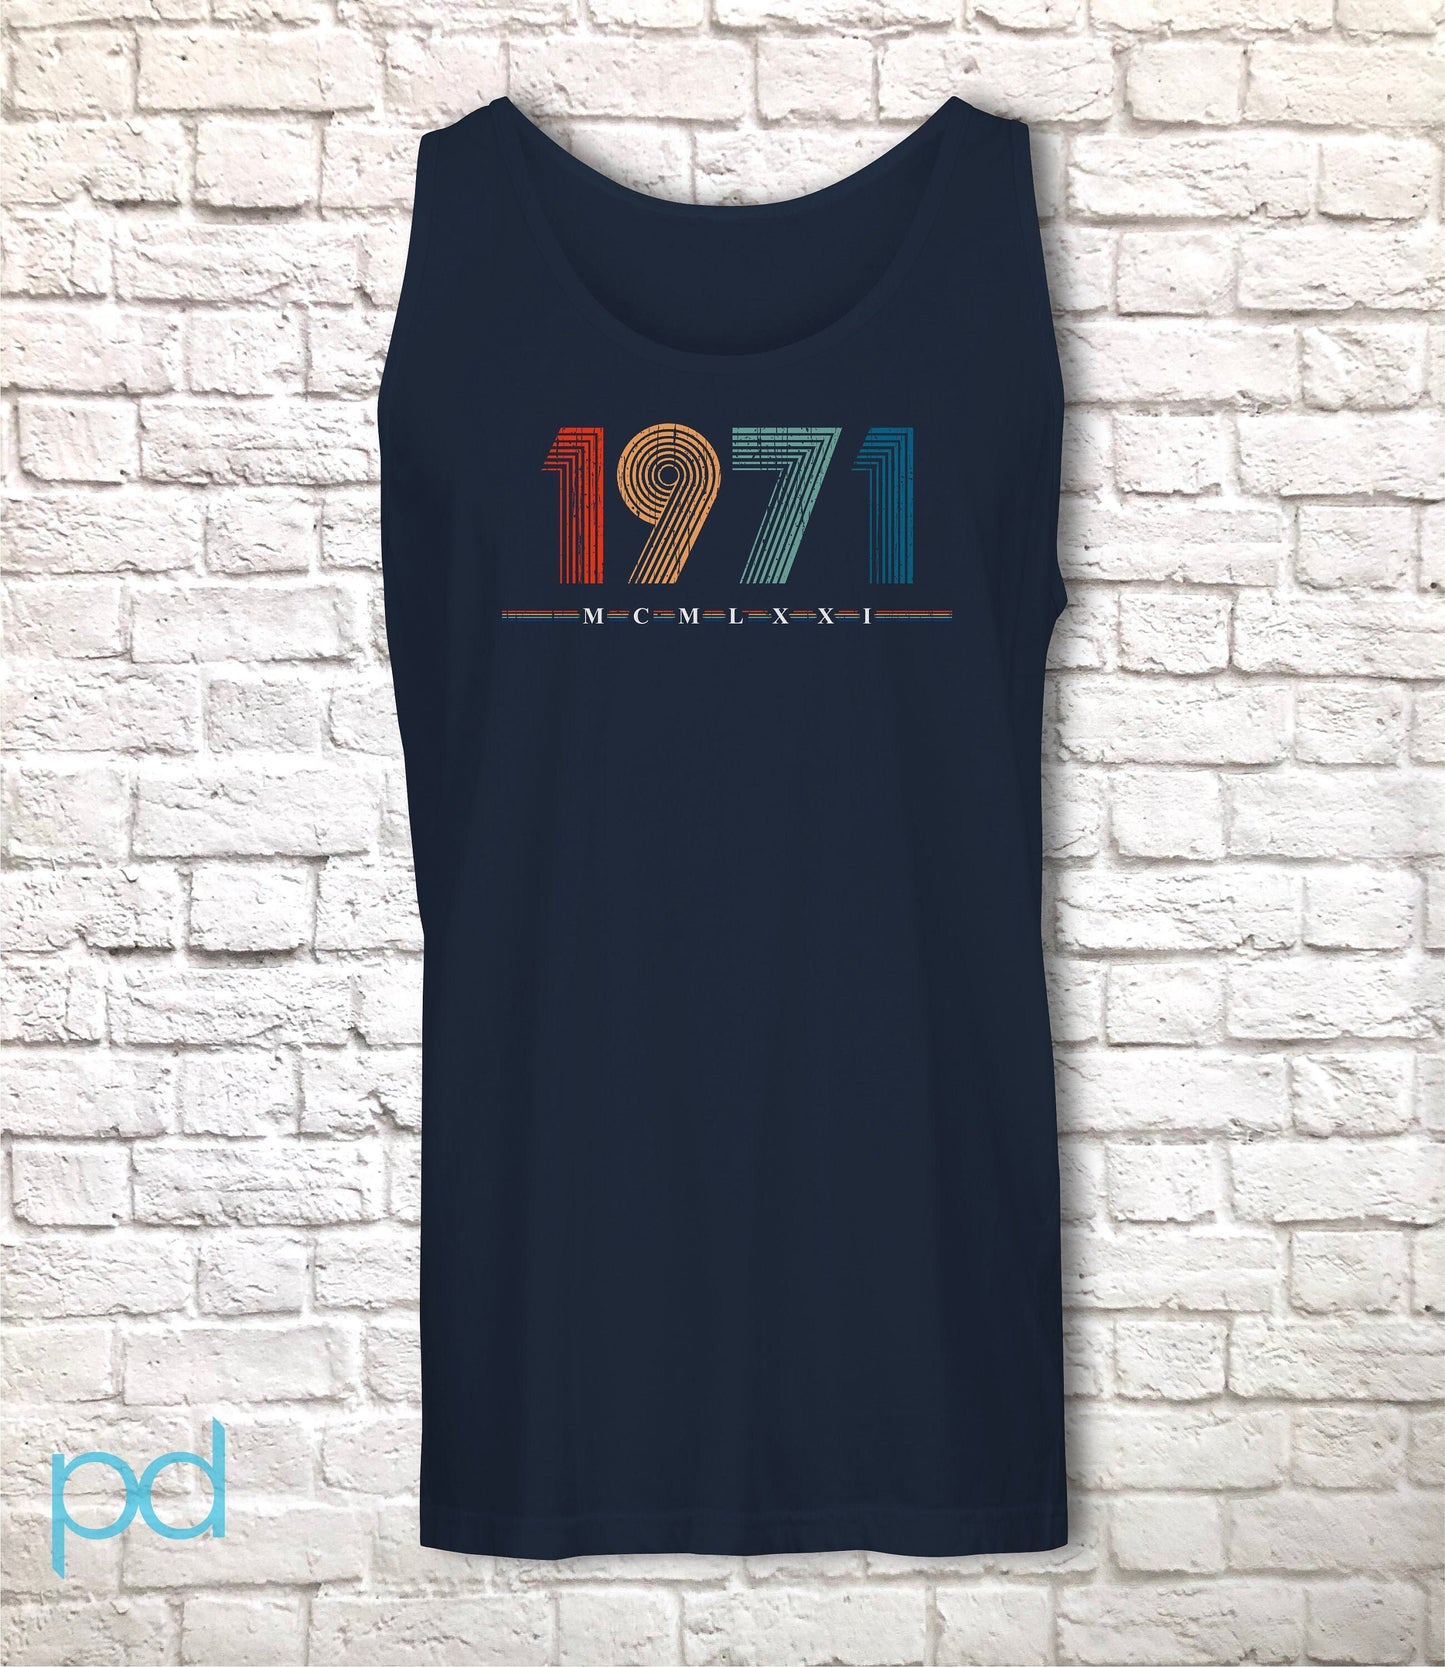 1971 Tank Top, 51st Birthday Gift Vest in Retro & Vintage 70s style, MCMLXXI Fiftieth Bday Muscle Unisex Shirt Top For Men or Women